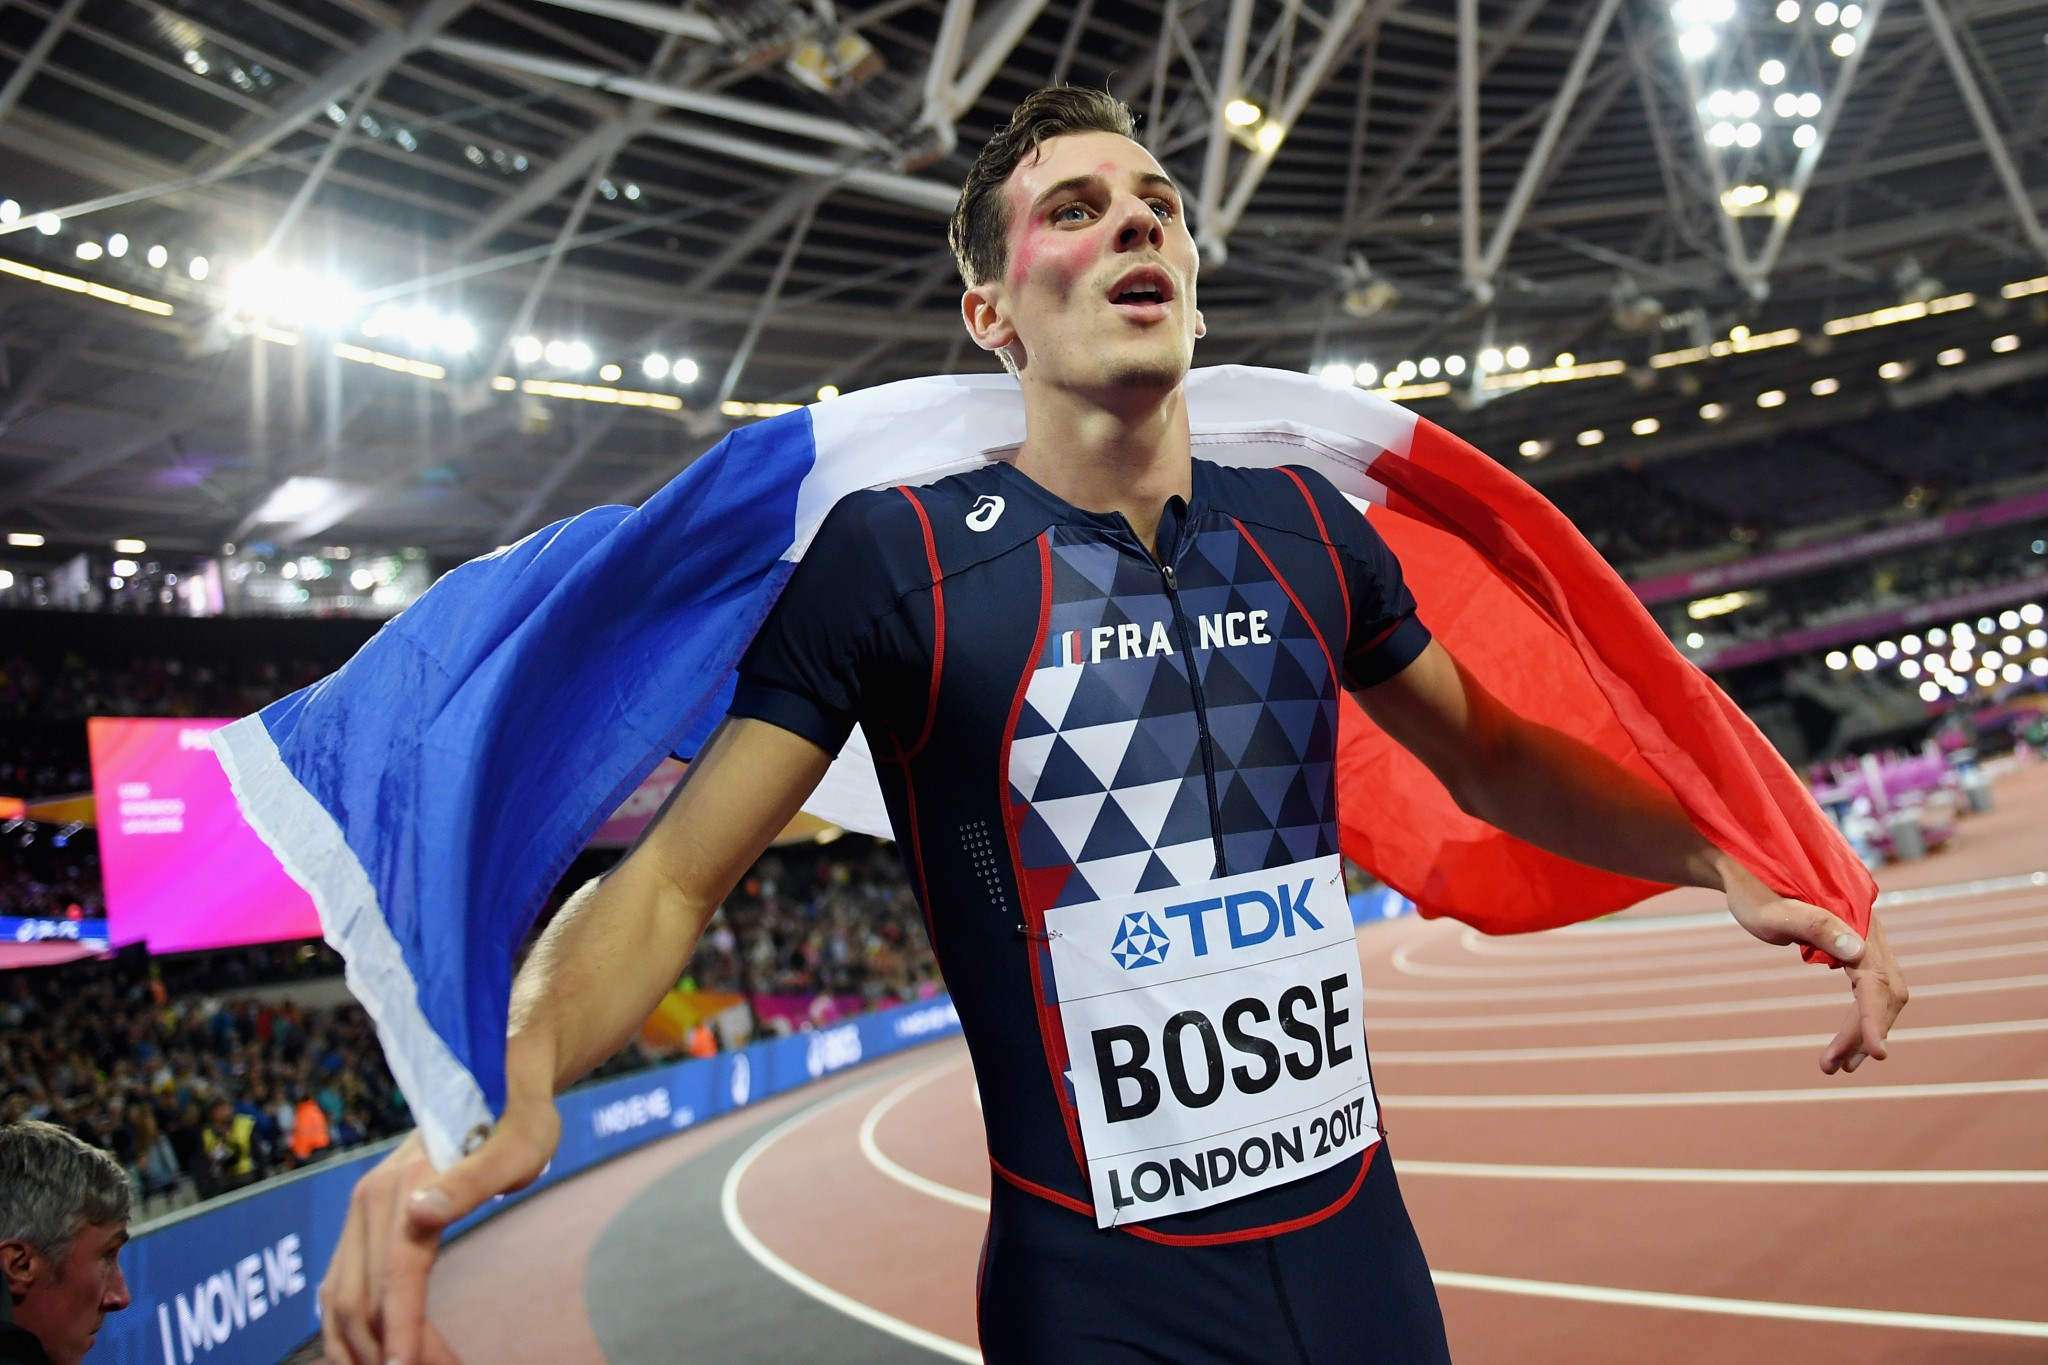 France's Pierre-Ambroise Bosse won a shock 800m gold medal ©Getty Images